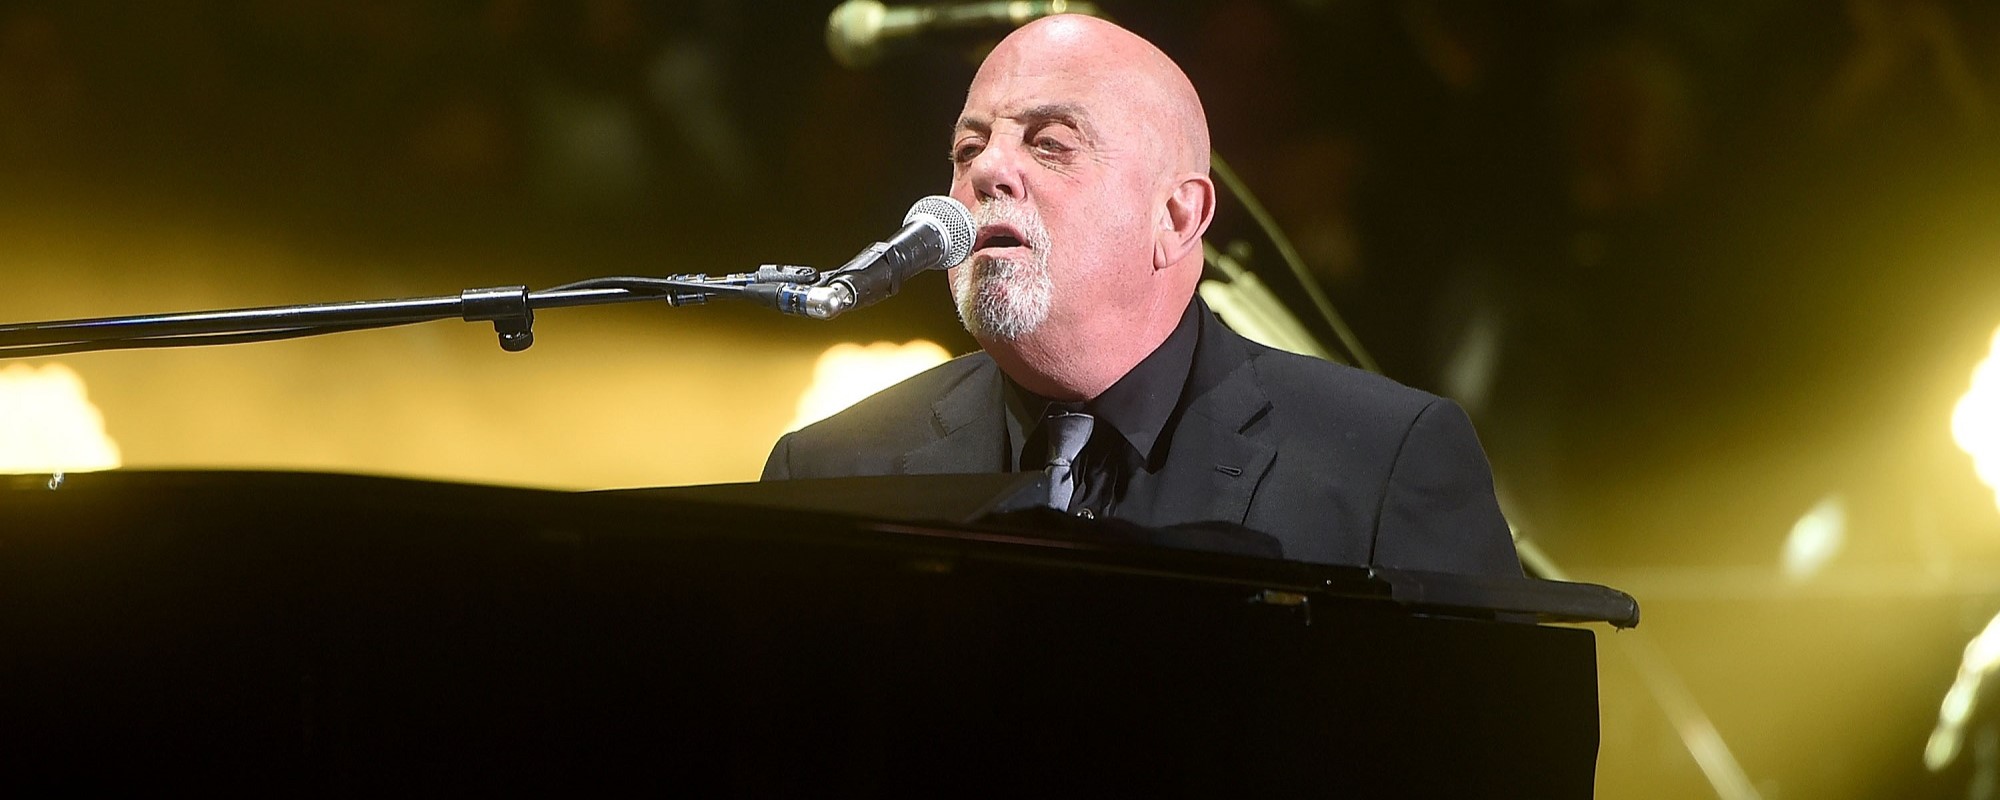 Billy Joel Fans in Awe Over Sneak Preview of New Song “Turn the Lights Back On”: “He Sounds as Good as Ever”